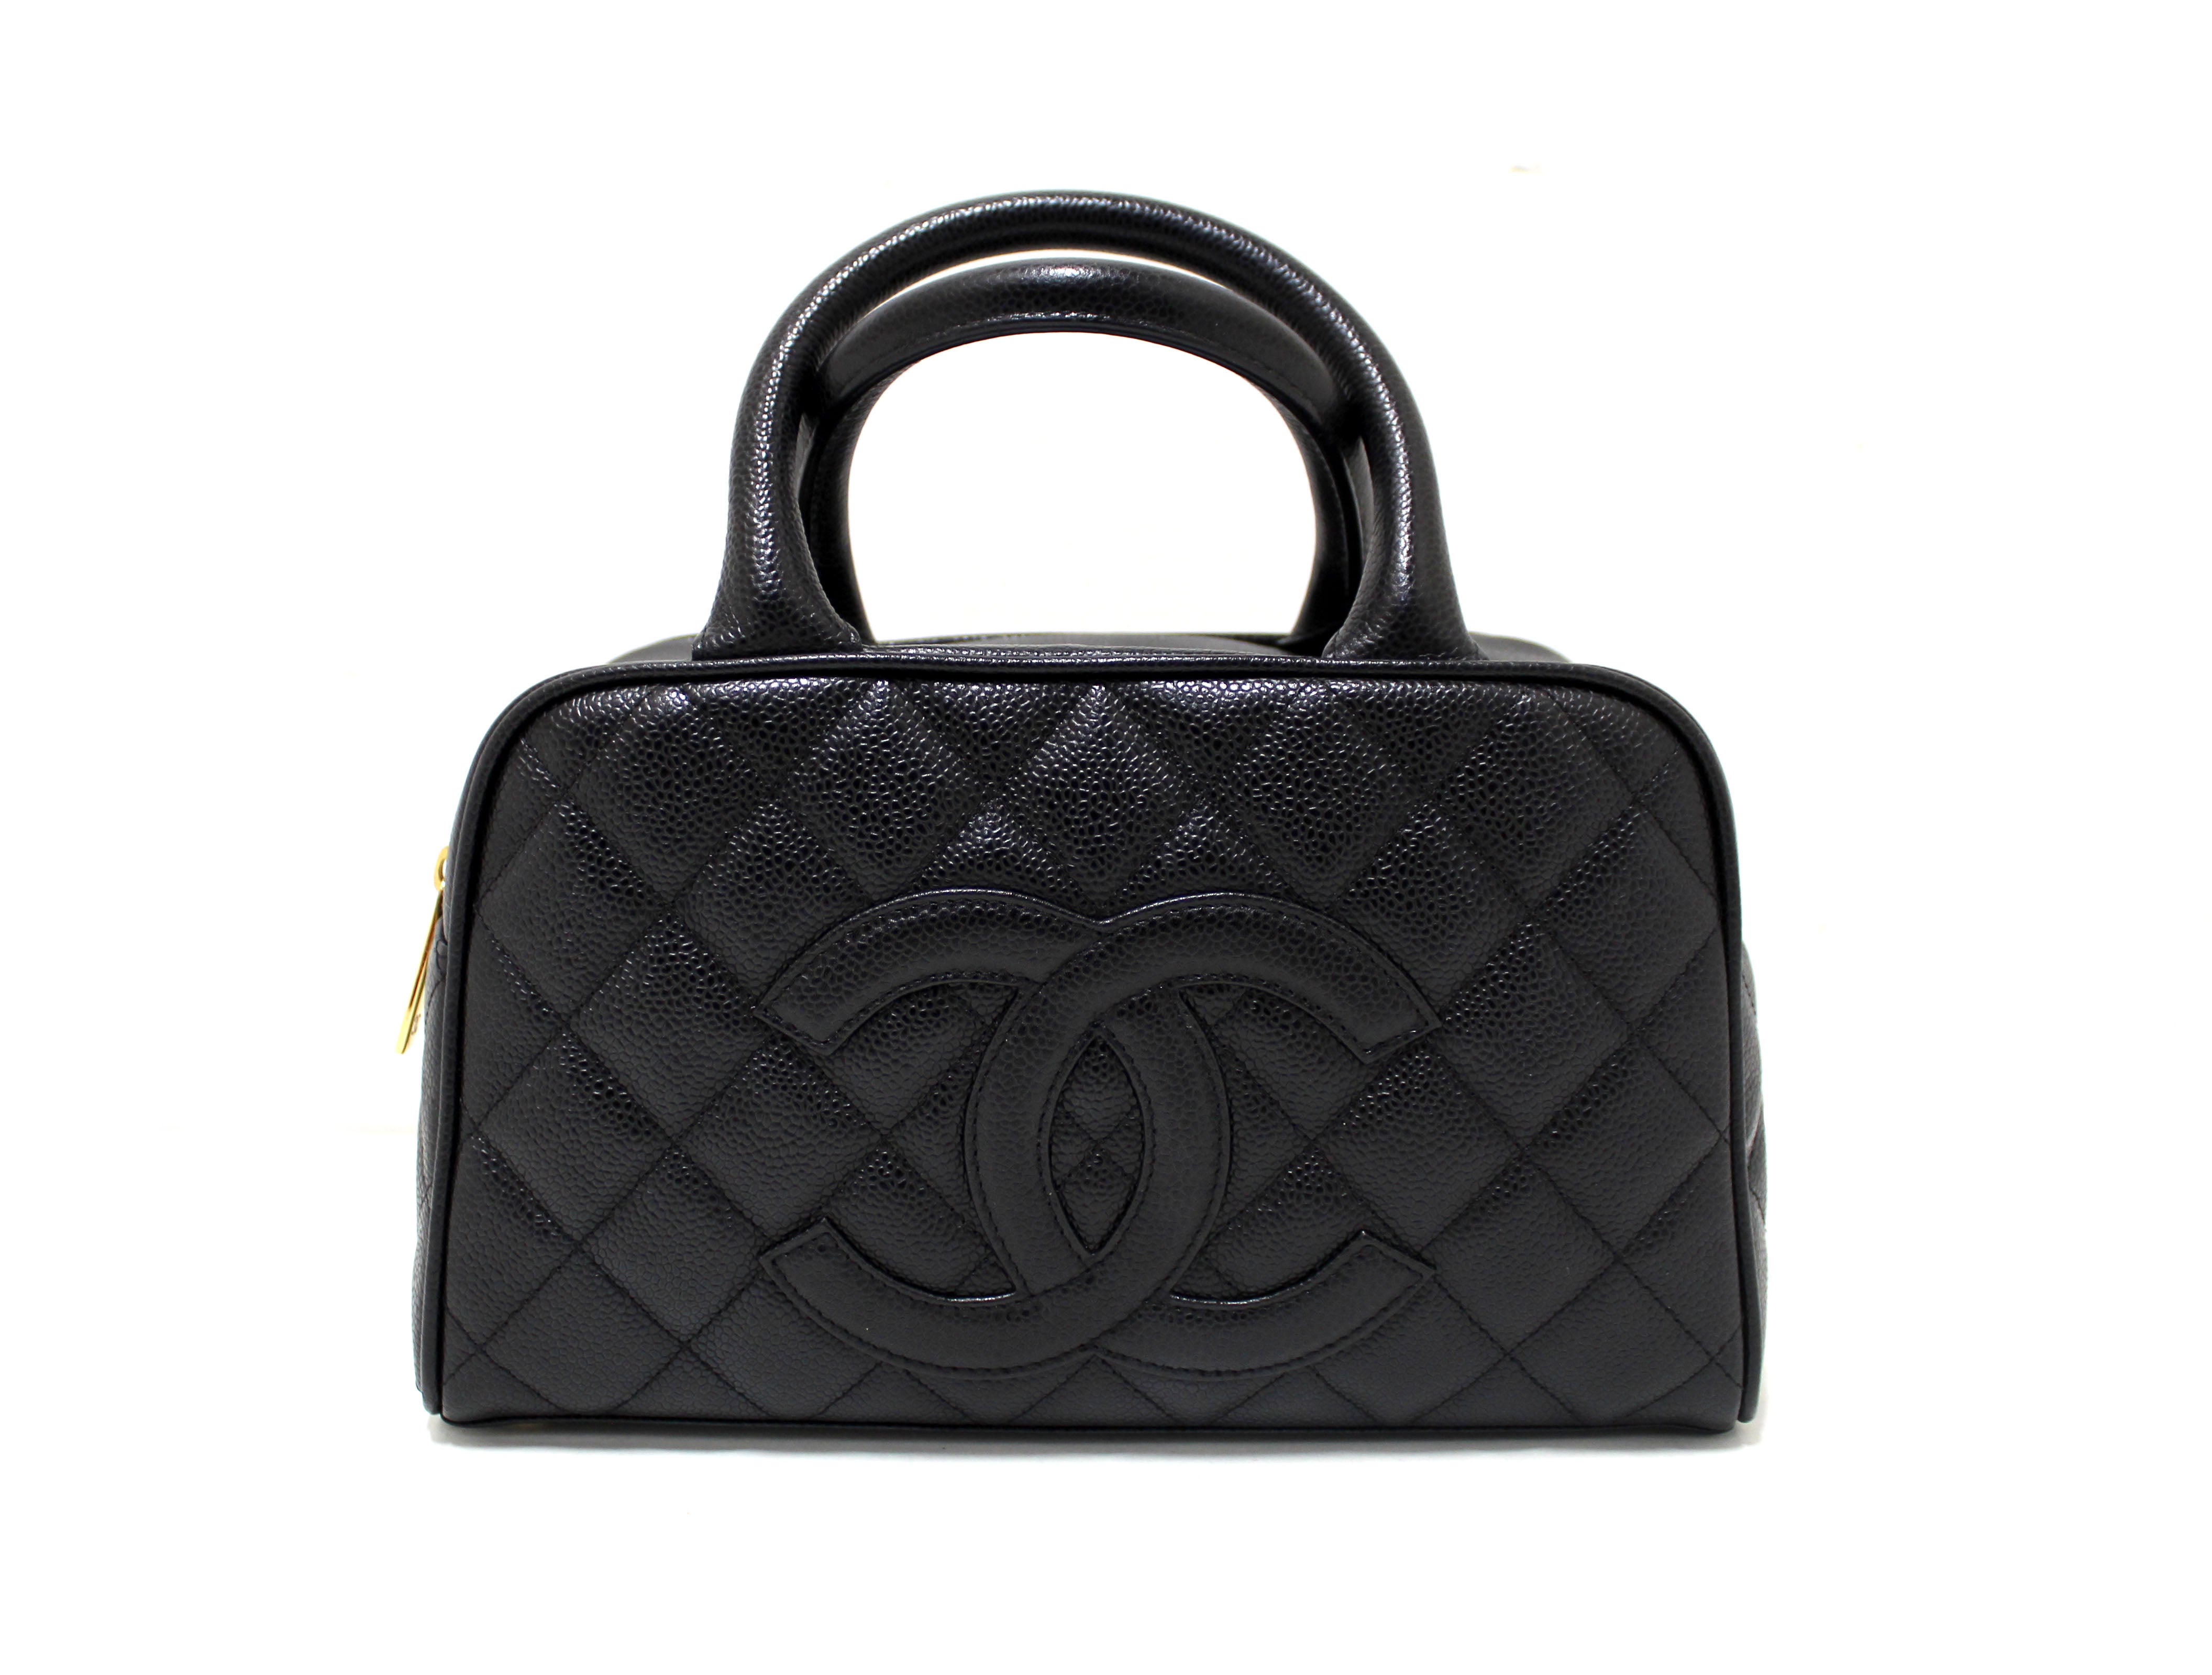 Authentic Chanel Black Caviar Quilted Leather Small Bowler Handbag